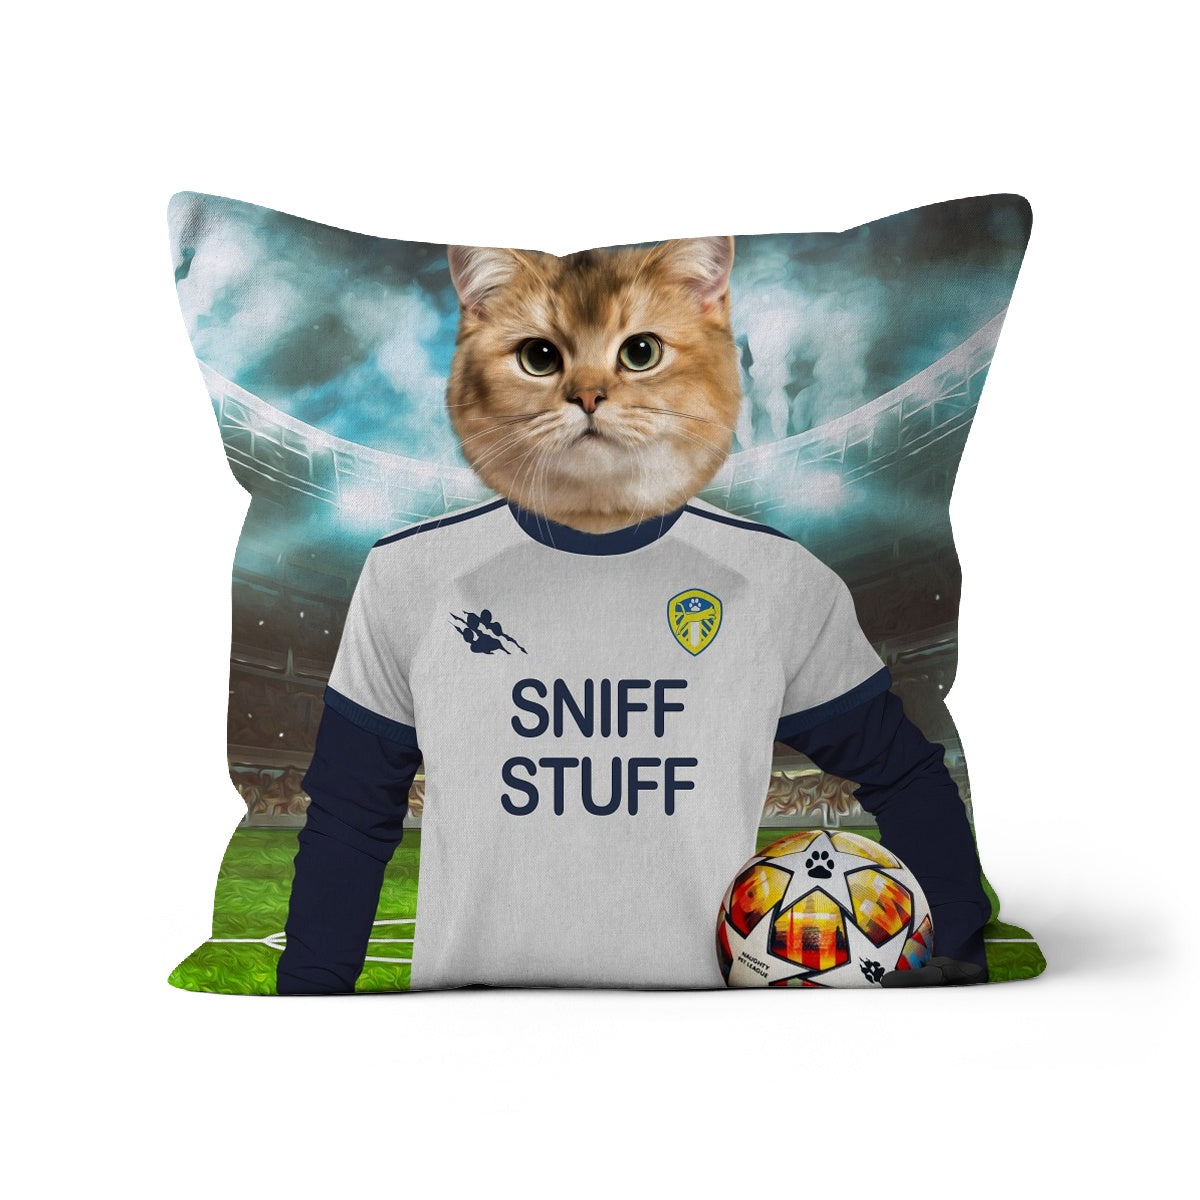 Leeds Pawnited Football Club Paw & Glory, paw and glory, dog personalized pillow, pillows with dogs picture, throw pillow personalized, my pet pillow, pet picture on pillow, pillow of your dog, Pet Portrait cushion